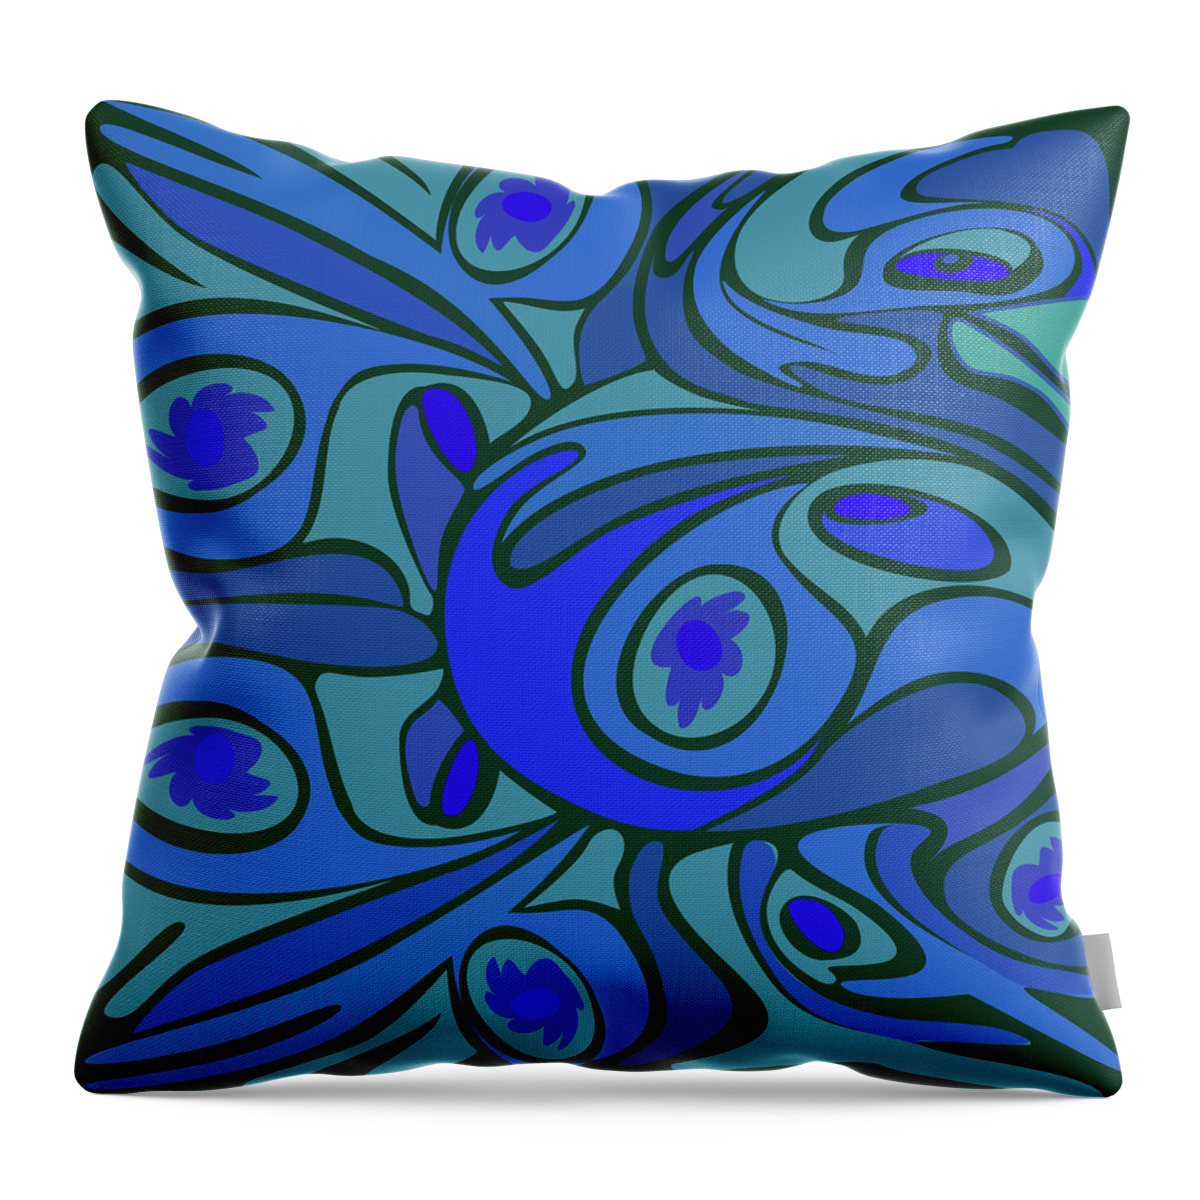 Chicken Meat Throw Pillow featuring the photograph Abstract Blue Rooster Pattern From Side by Charles Harker